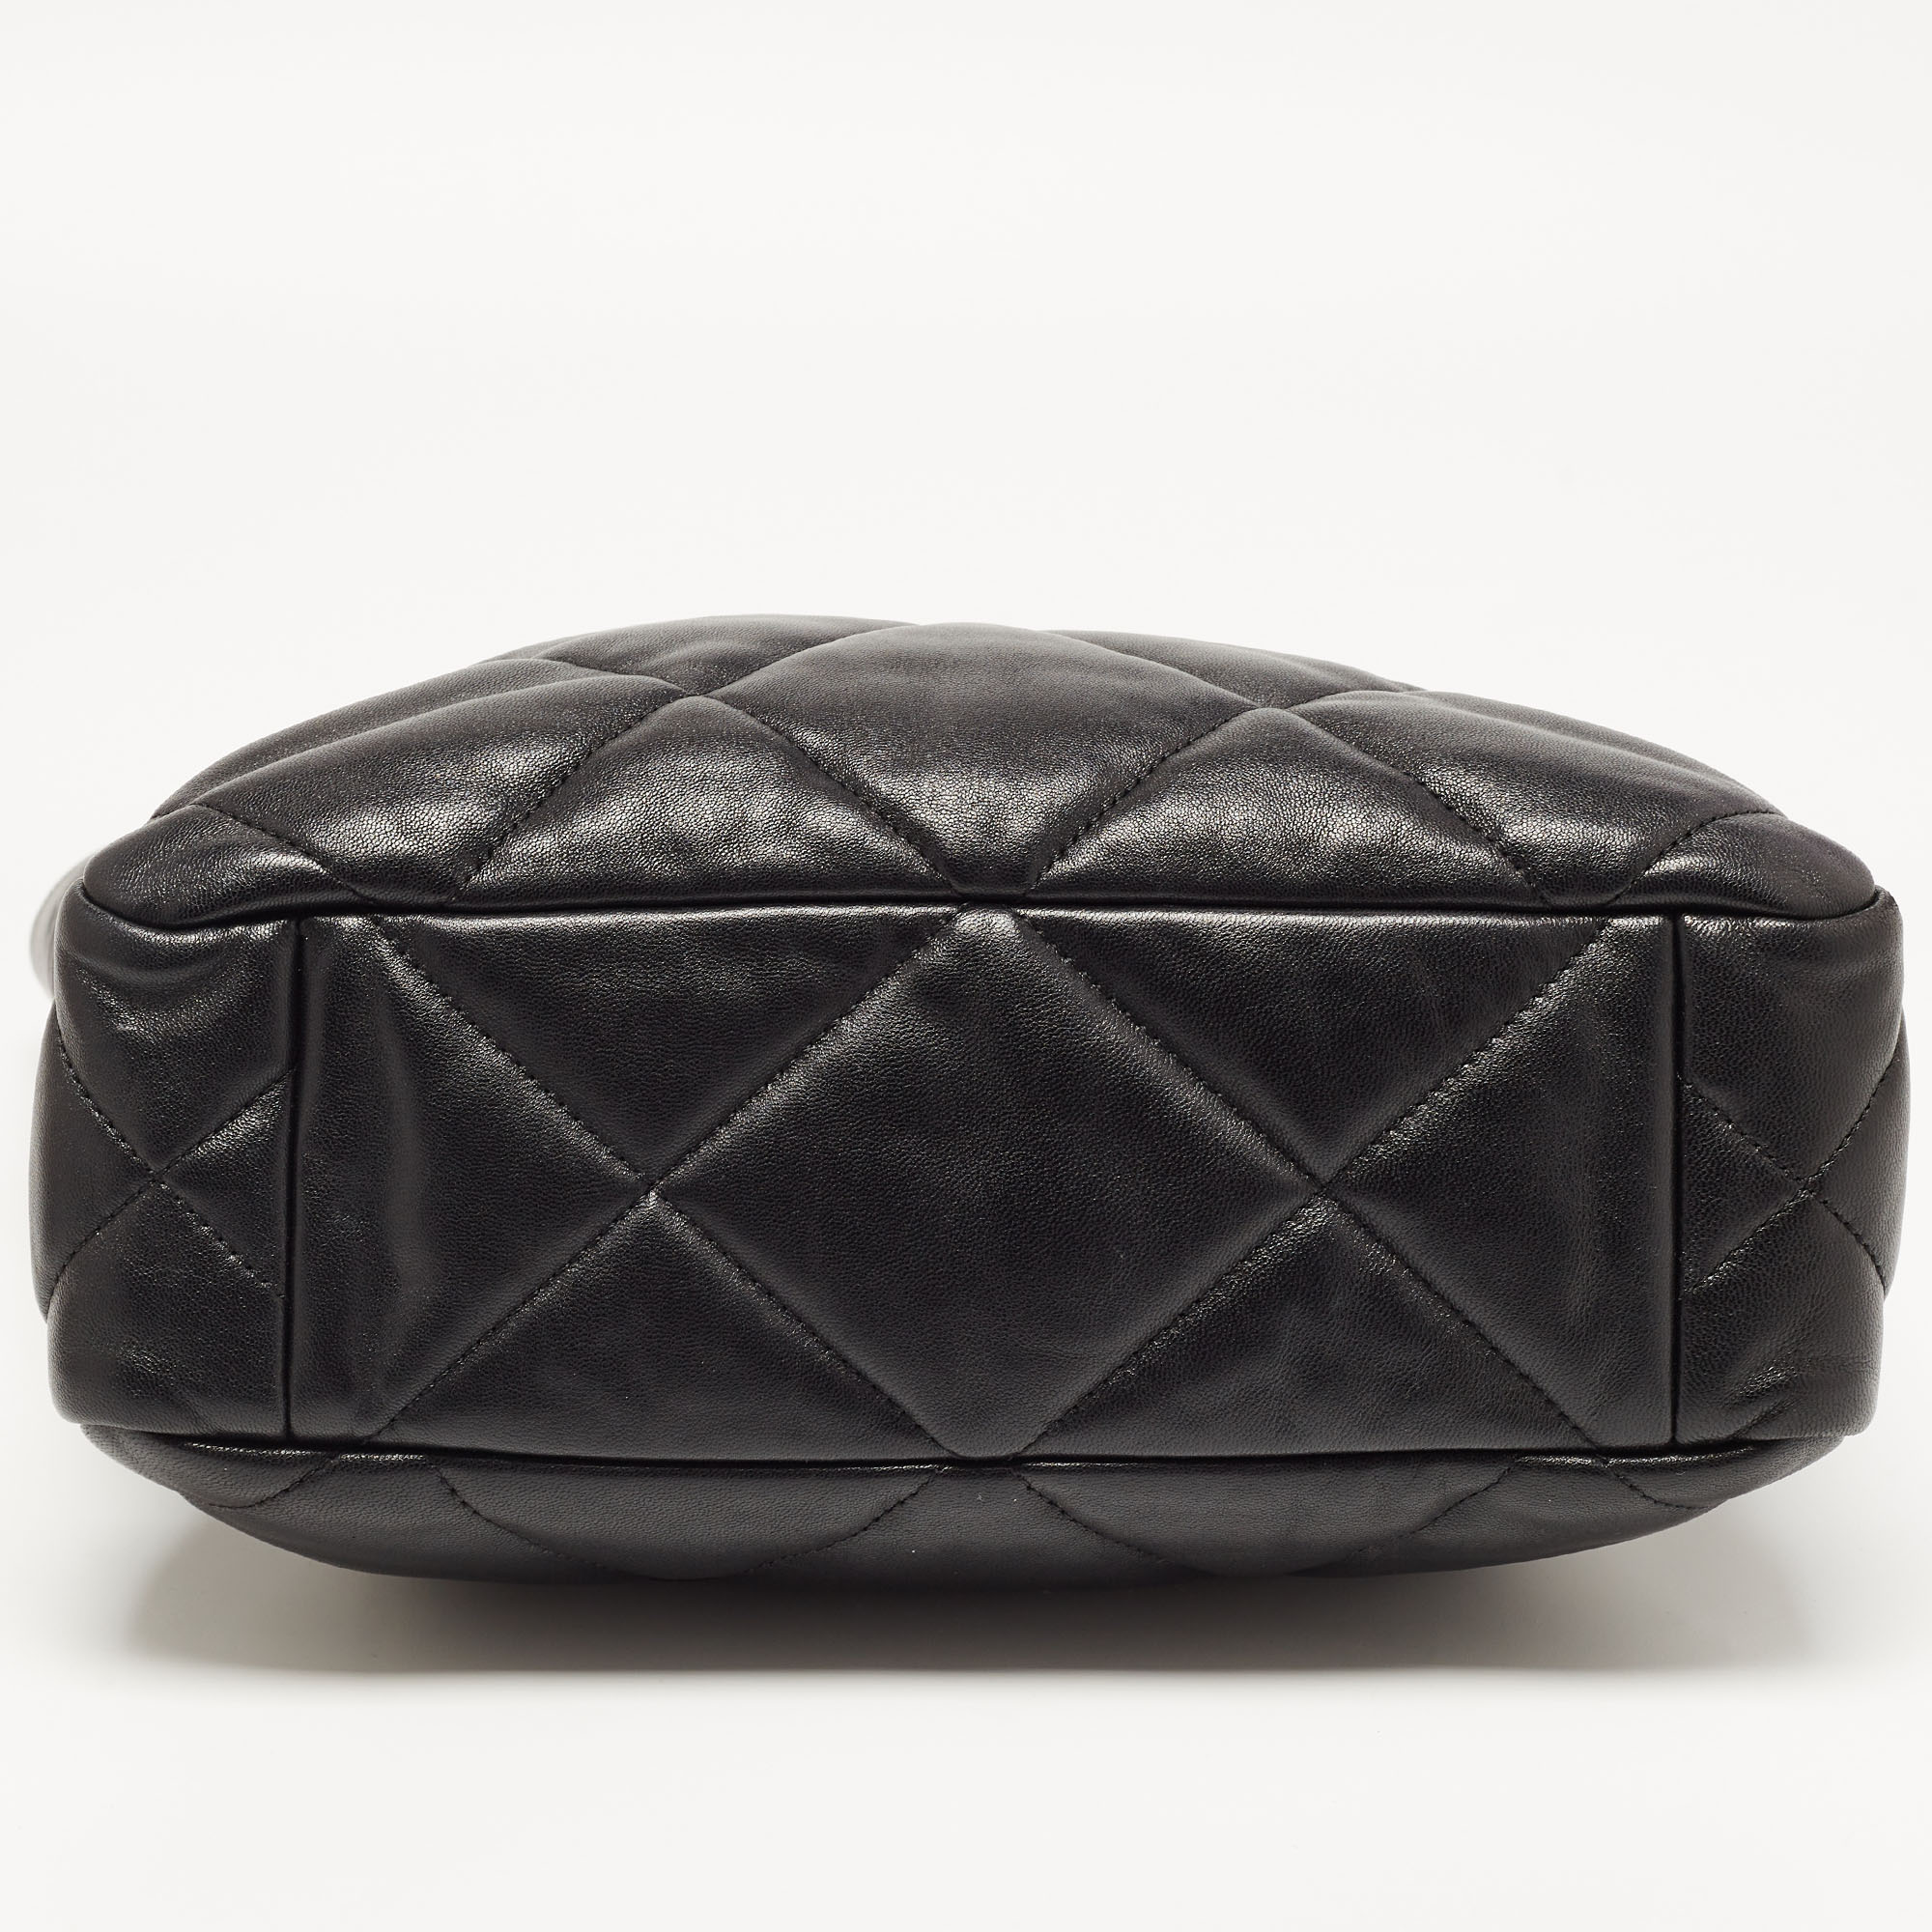 Chanel Black Quilted Leather 19 Shopper Tote